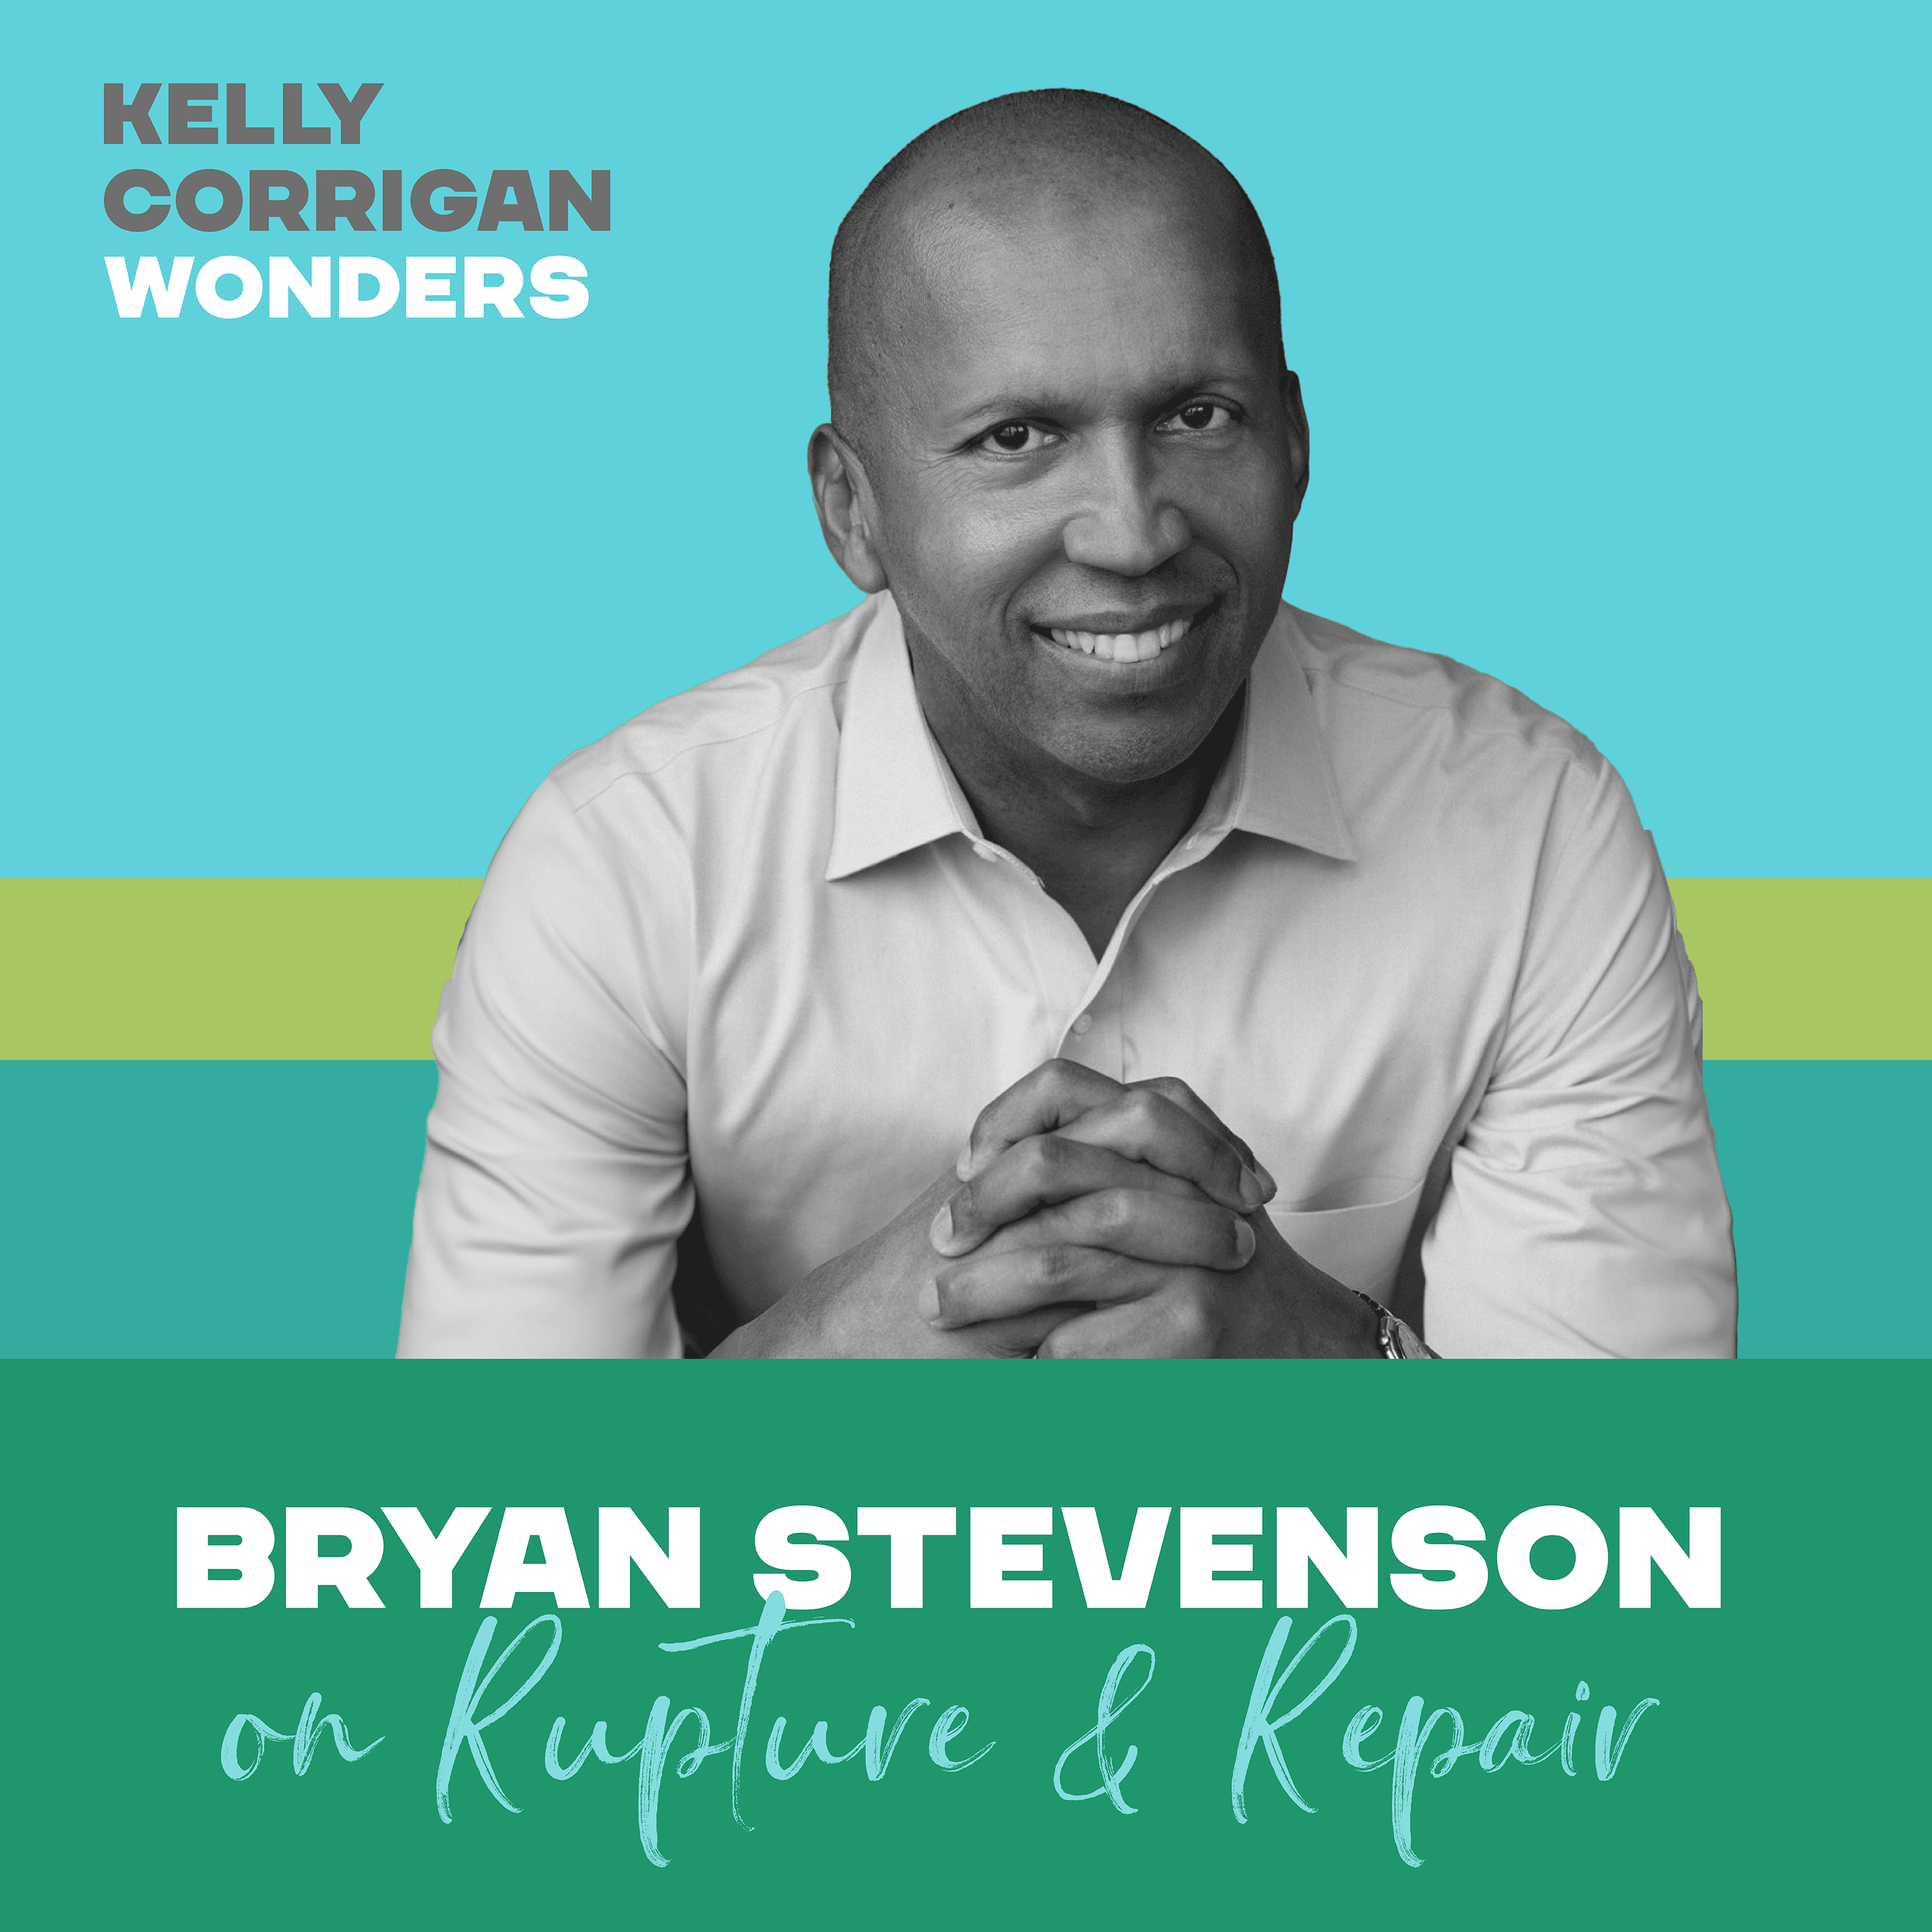 Thumbnail for "Going Deep with Bryan Stevenson on Rupture & Repair".